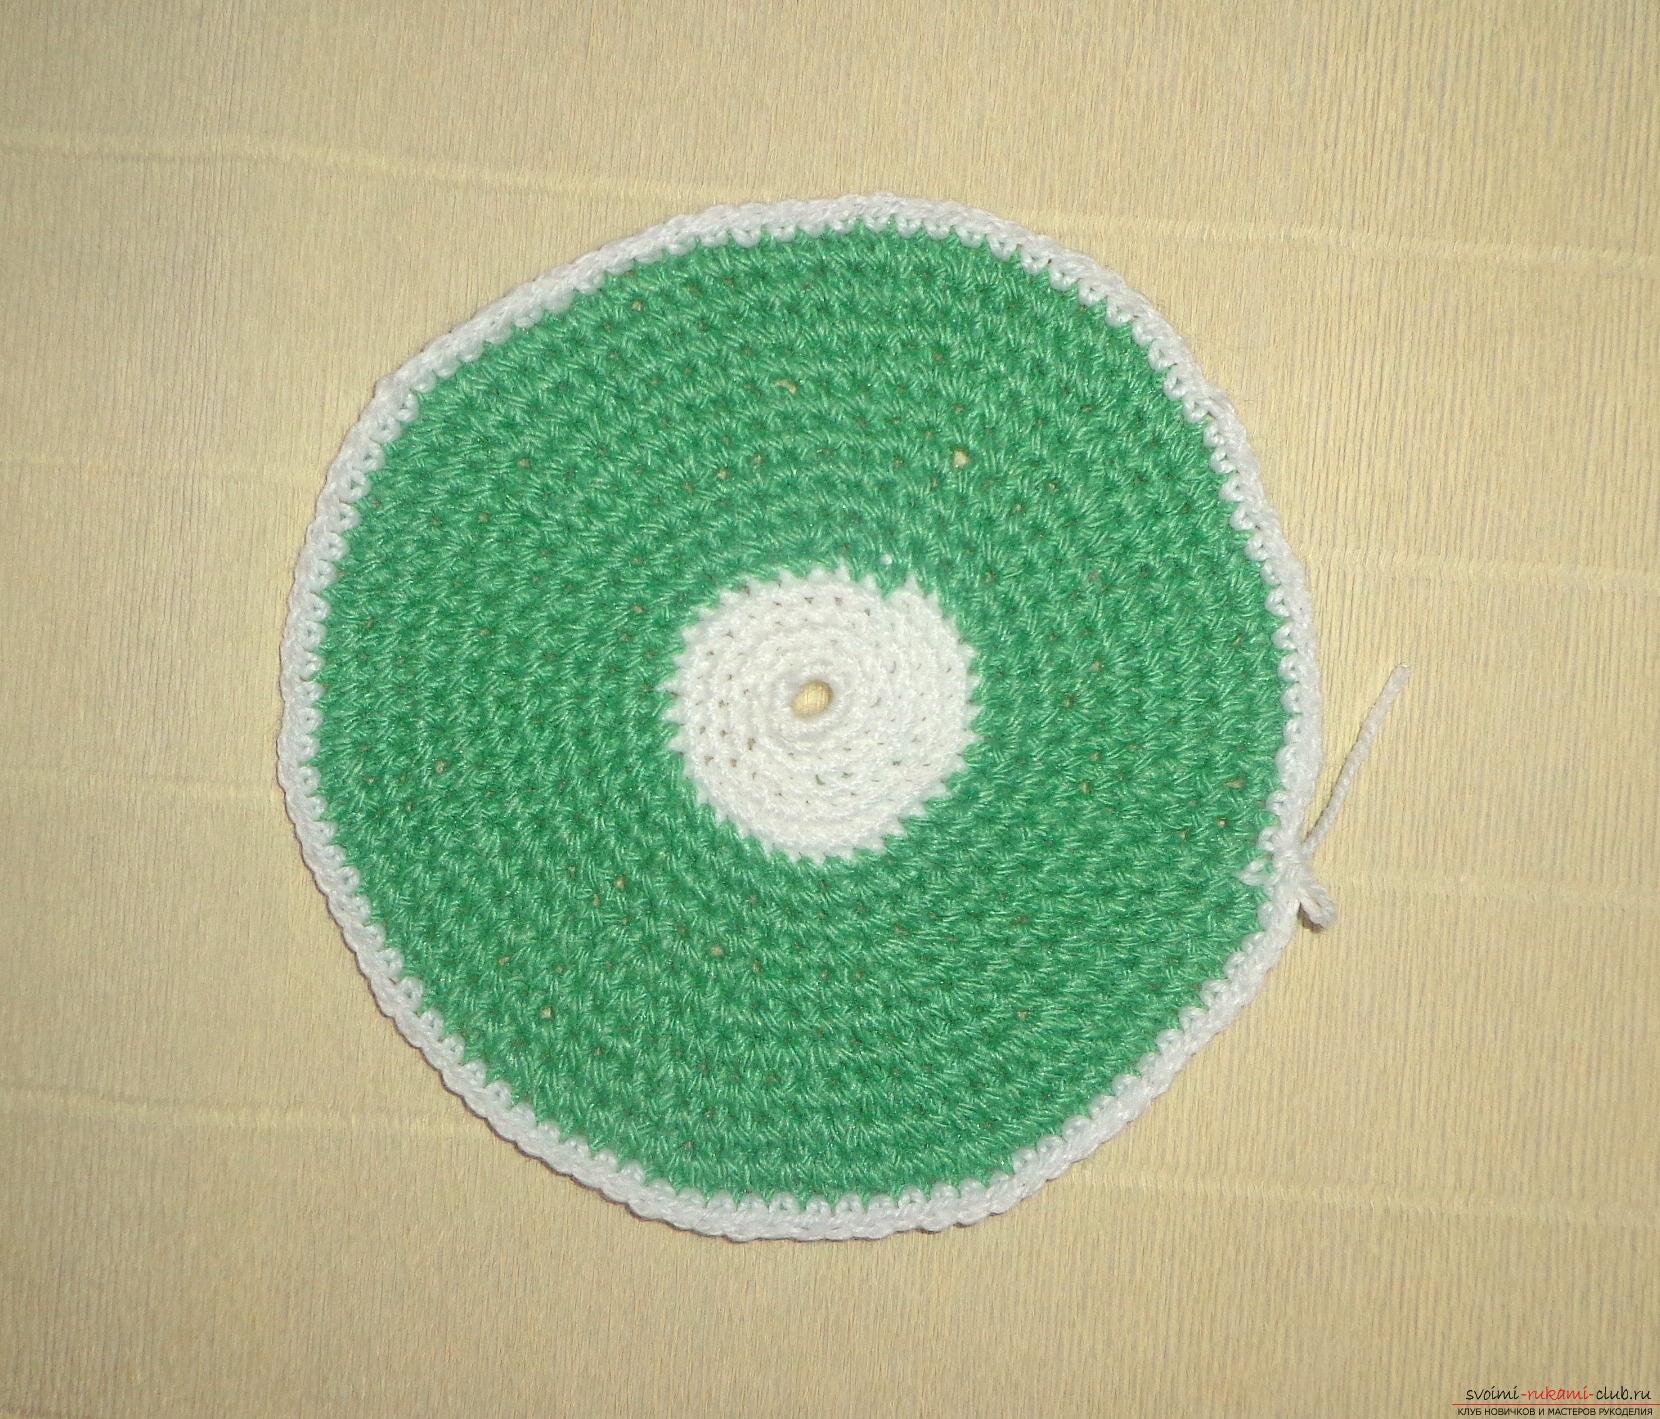 Crochet crochet lesson for hot Kiwi with a description of steps and photos. Photo №8